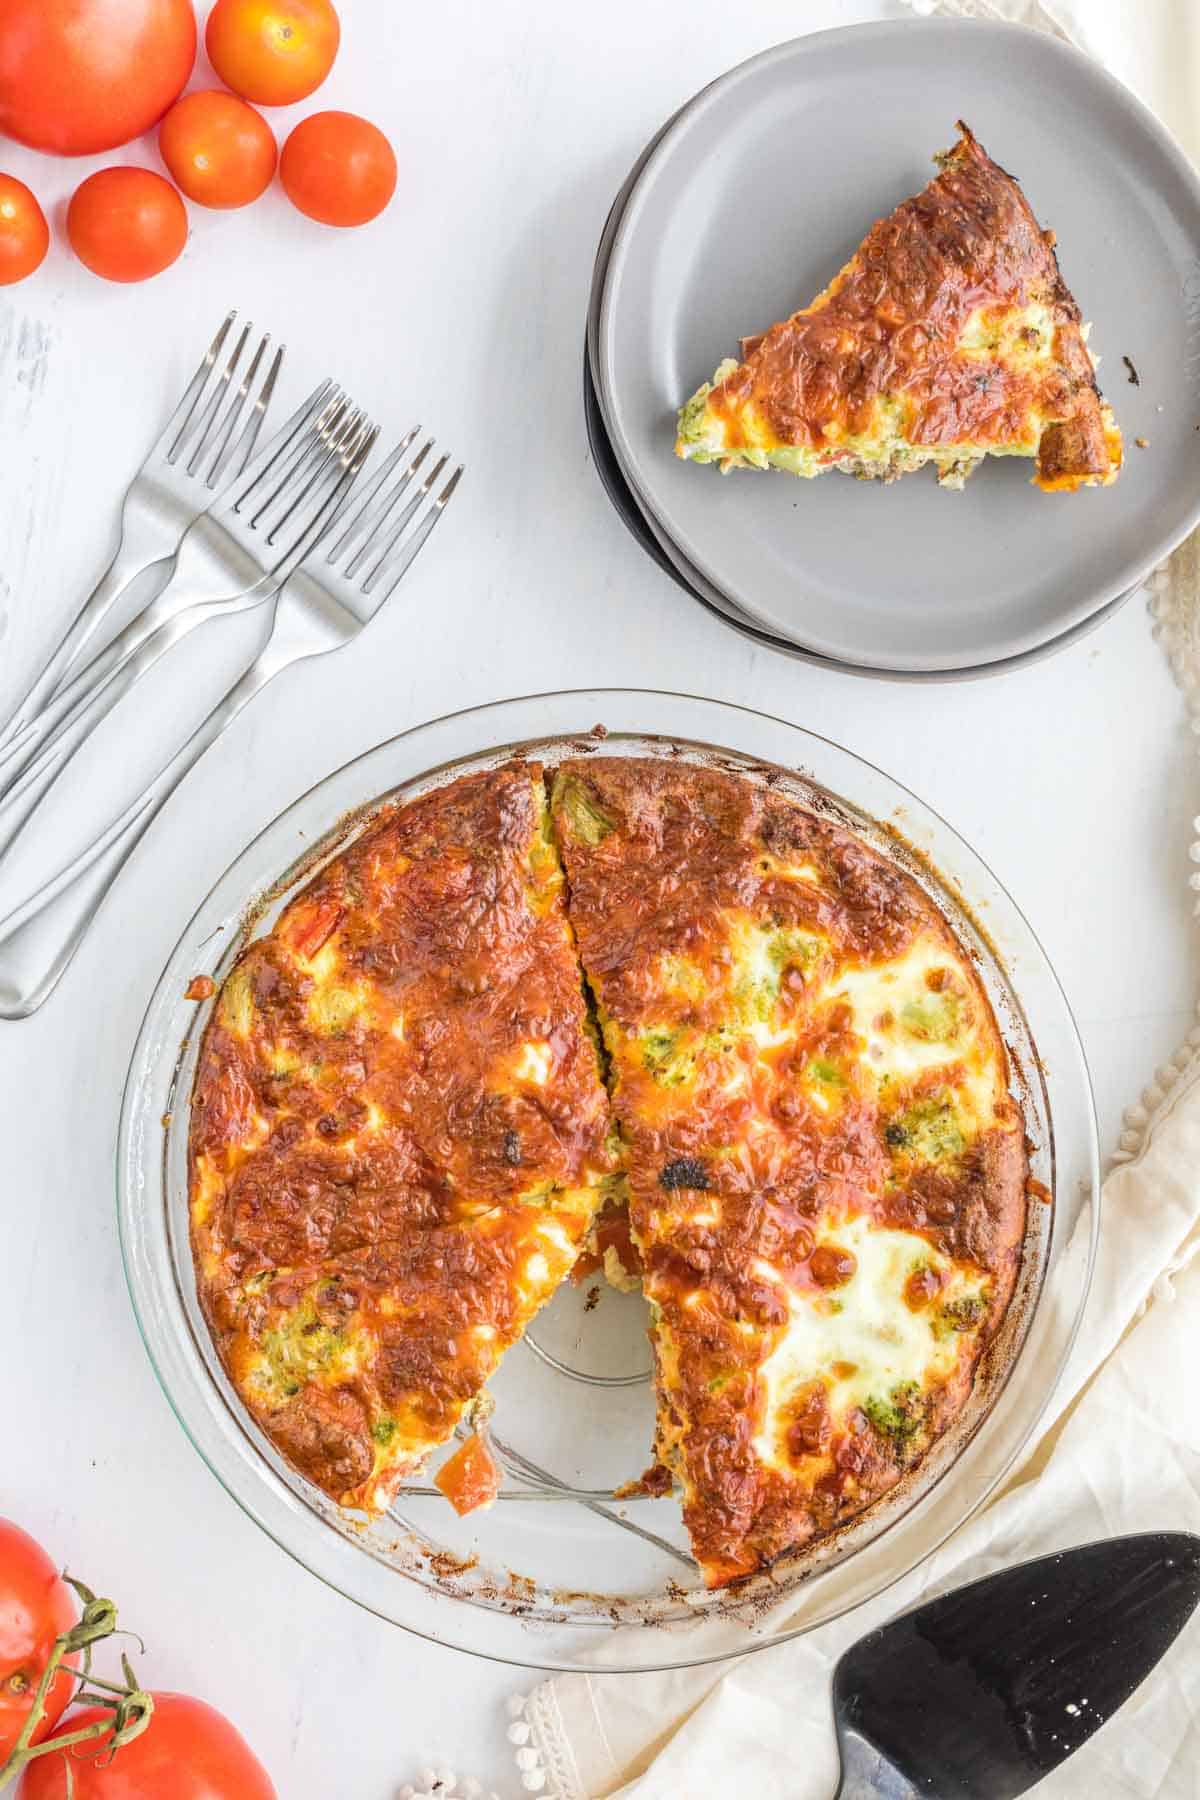 A bird's eye view of a quiche that's missing one slice next to a plate with the missing slice on it.